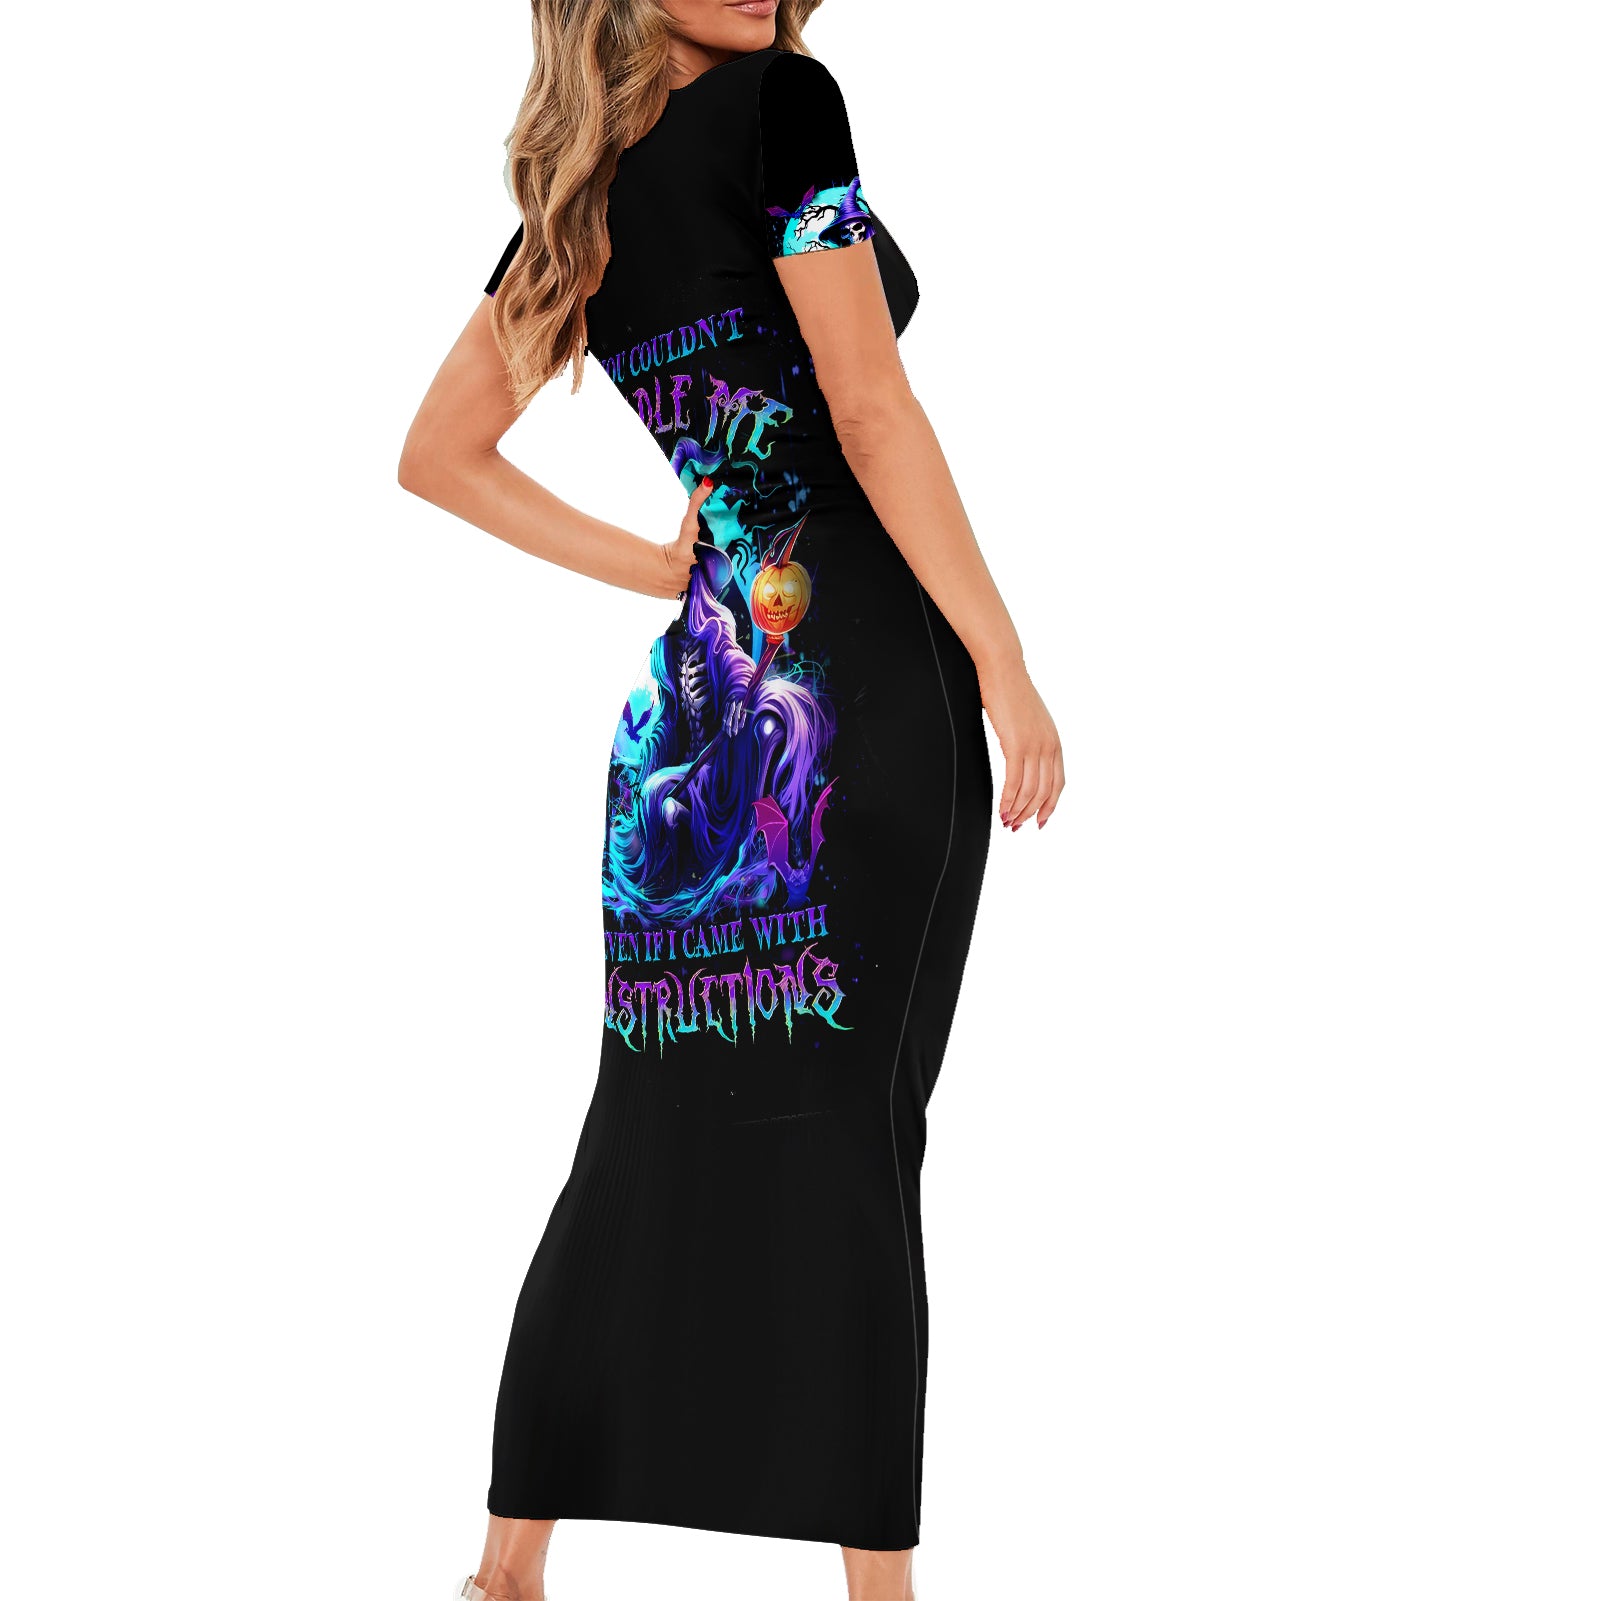 witch-skull-short-sleeve-bodycon-dress-you-couldnt-handle-me-even-with-intrustions